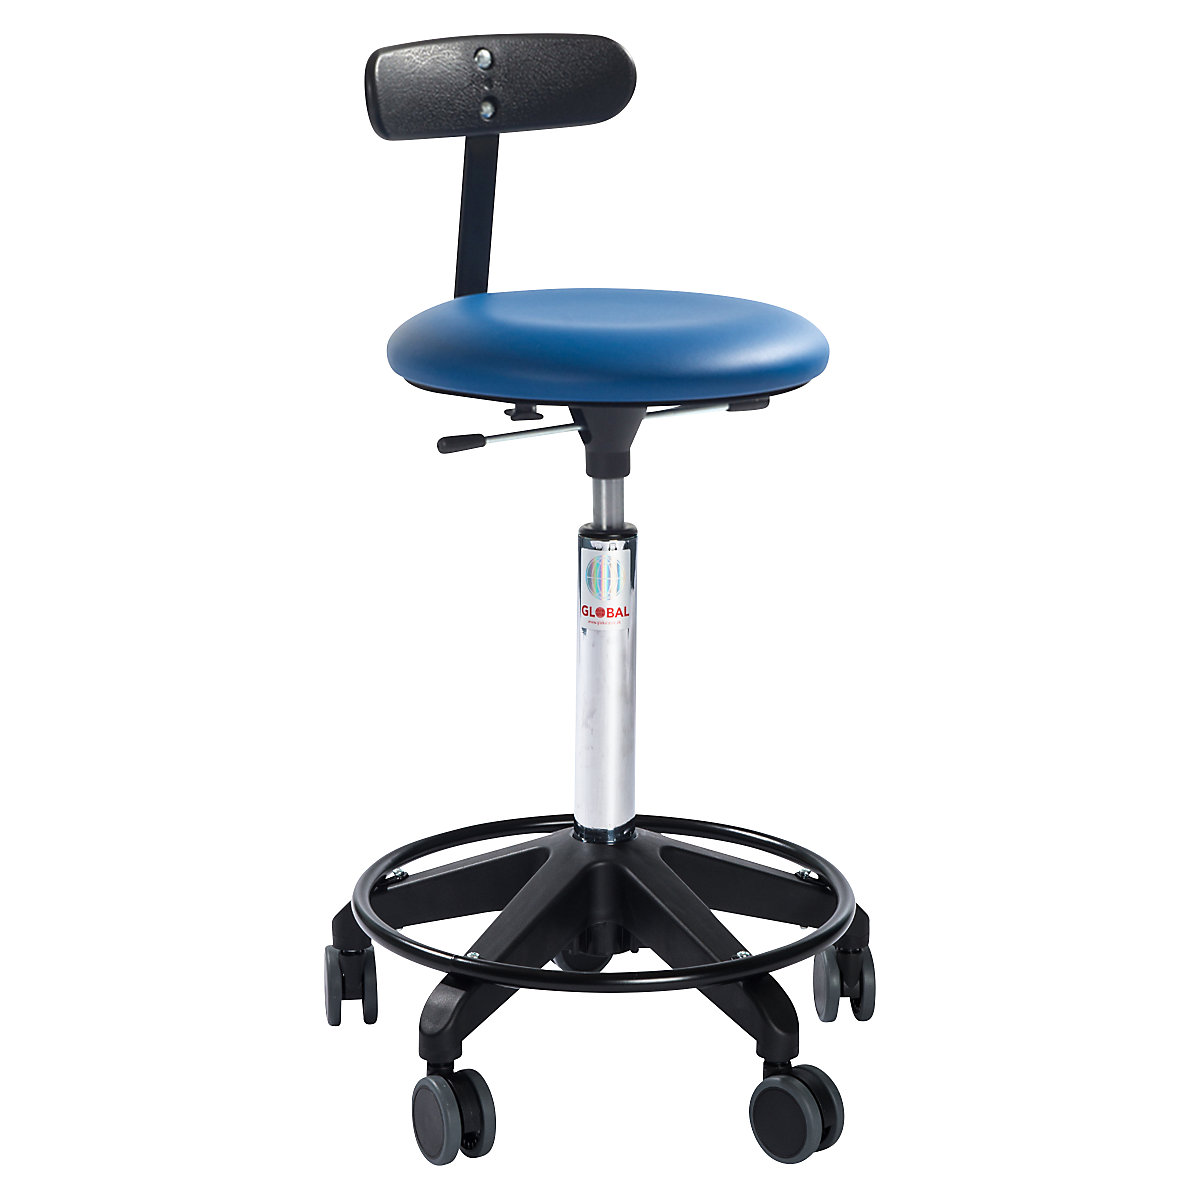 Industrial stool, height adjustable, with castors and back rest, blue, height 540 – 730 mm-6